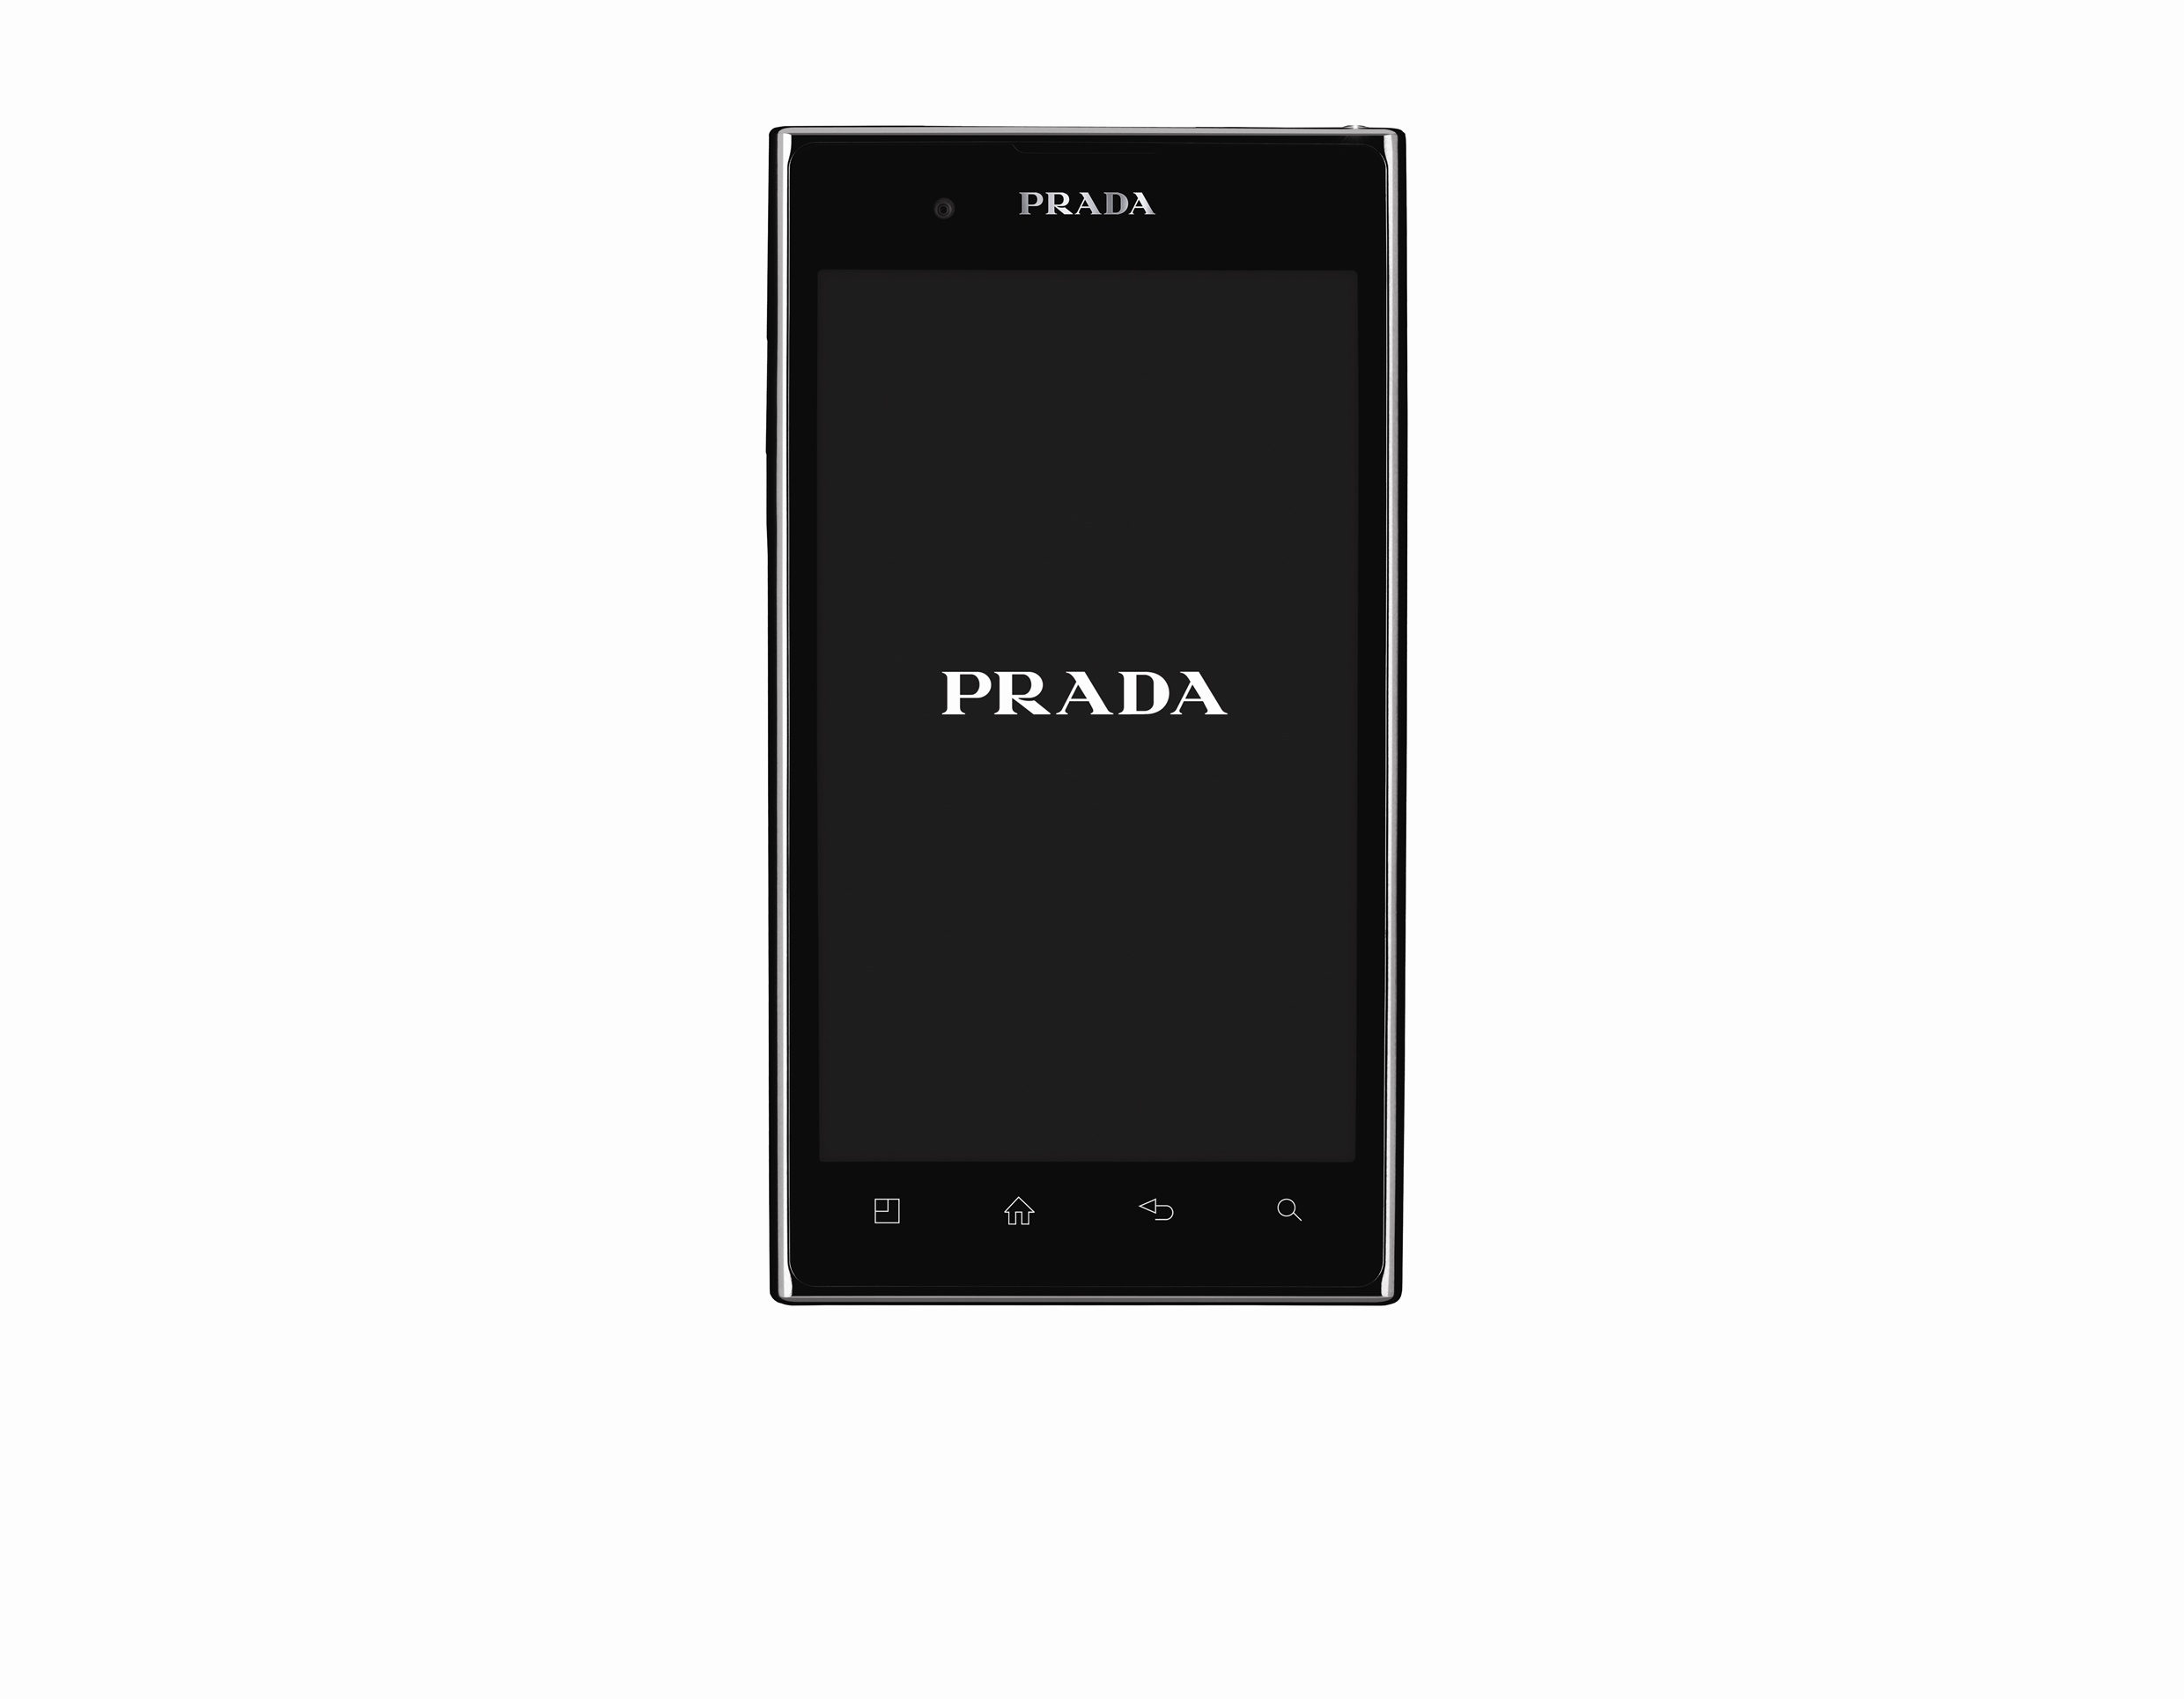 Front view of PRADA phone by LG 3.0